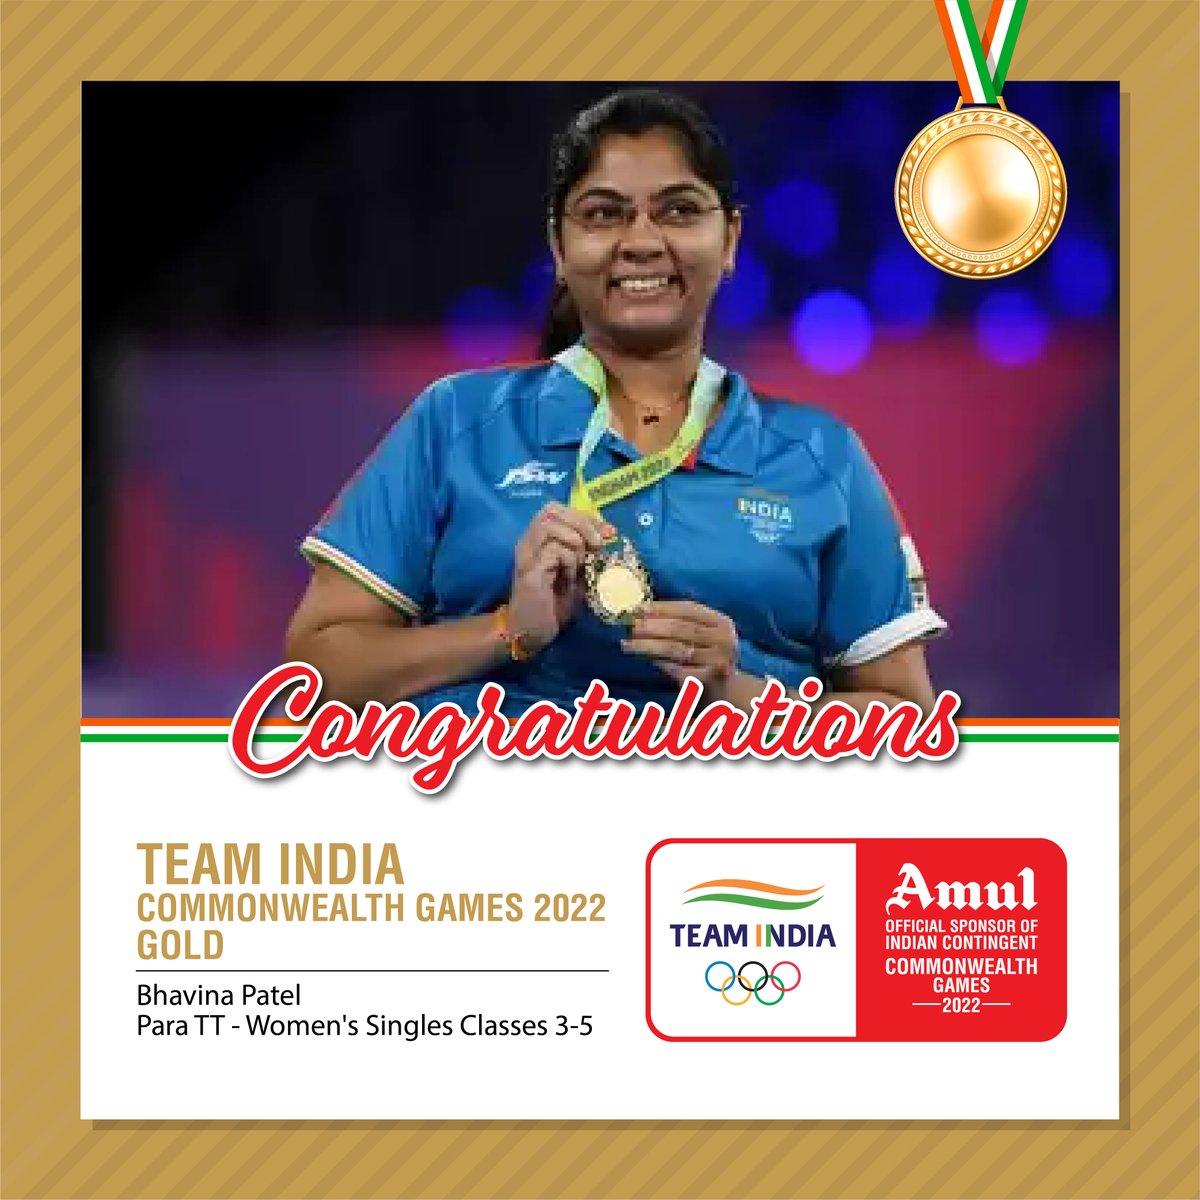 Indian para table tennis player Bhavina Patel won a gold medal in the women's singles class 3-5 at the #CWG22. 
She previously won a silver at the Tokyo Paralympics.

#CWG #Commonwealth #CWG2022 #Birmingham #India #Gold #ParaTableTennis #Medal #BhavinaPatel